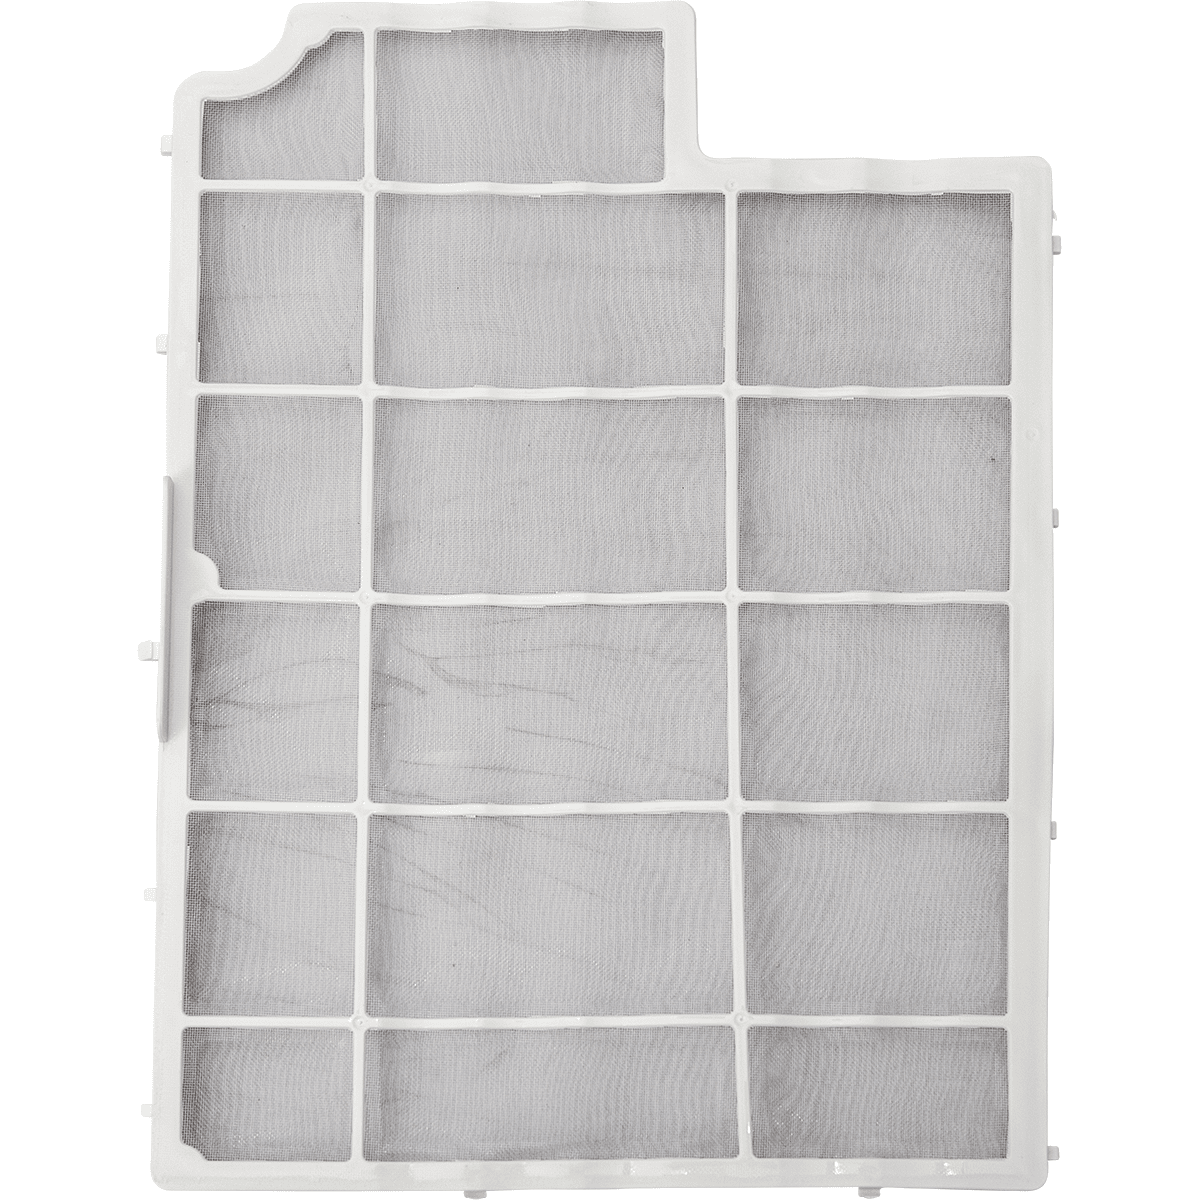 Honeywell Lower Air Filter for White MN4 Series Portable AC (A7331-380-P-FN)